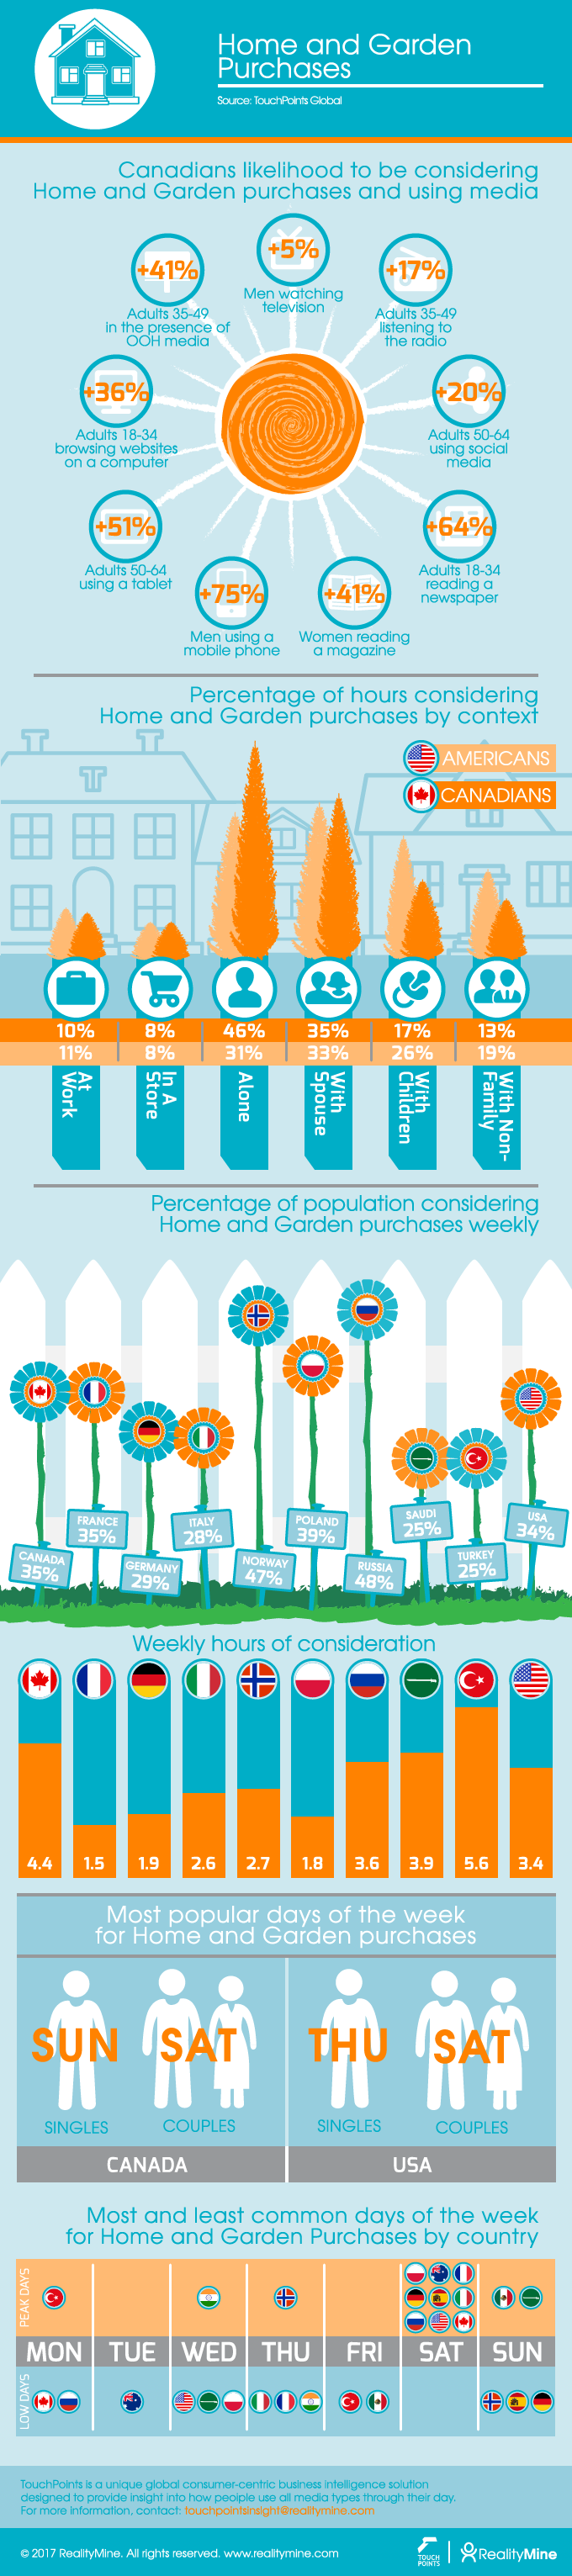 Home and Garden Infographic